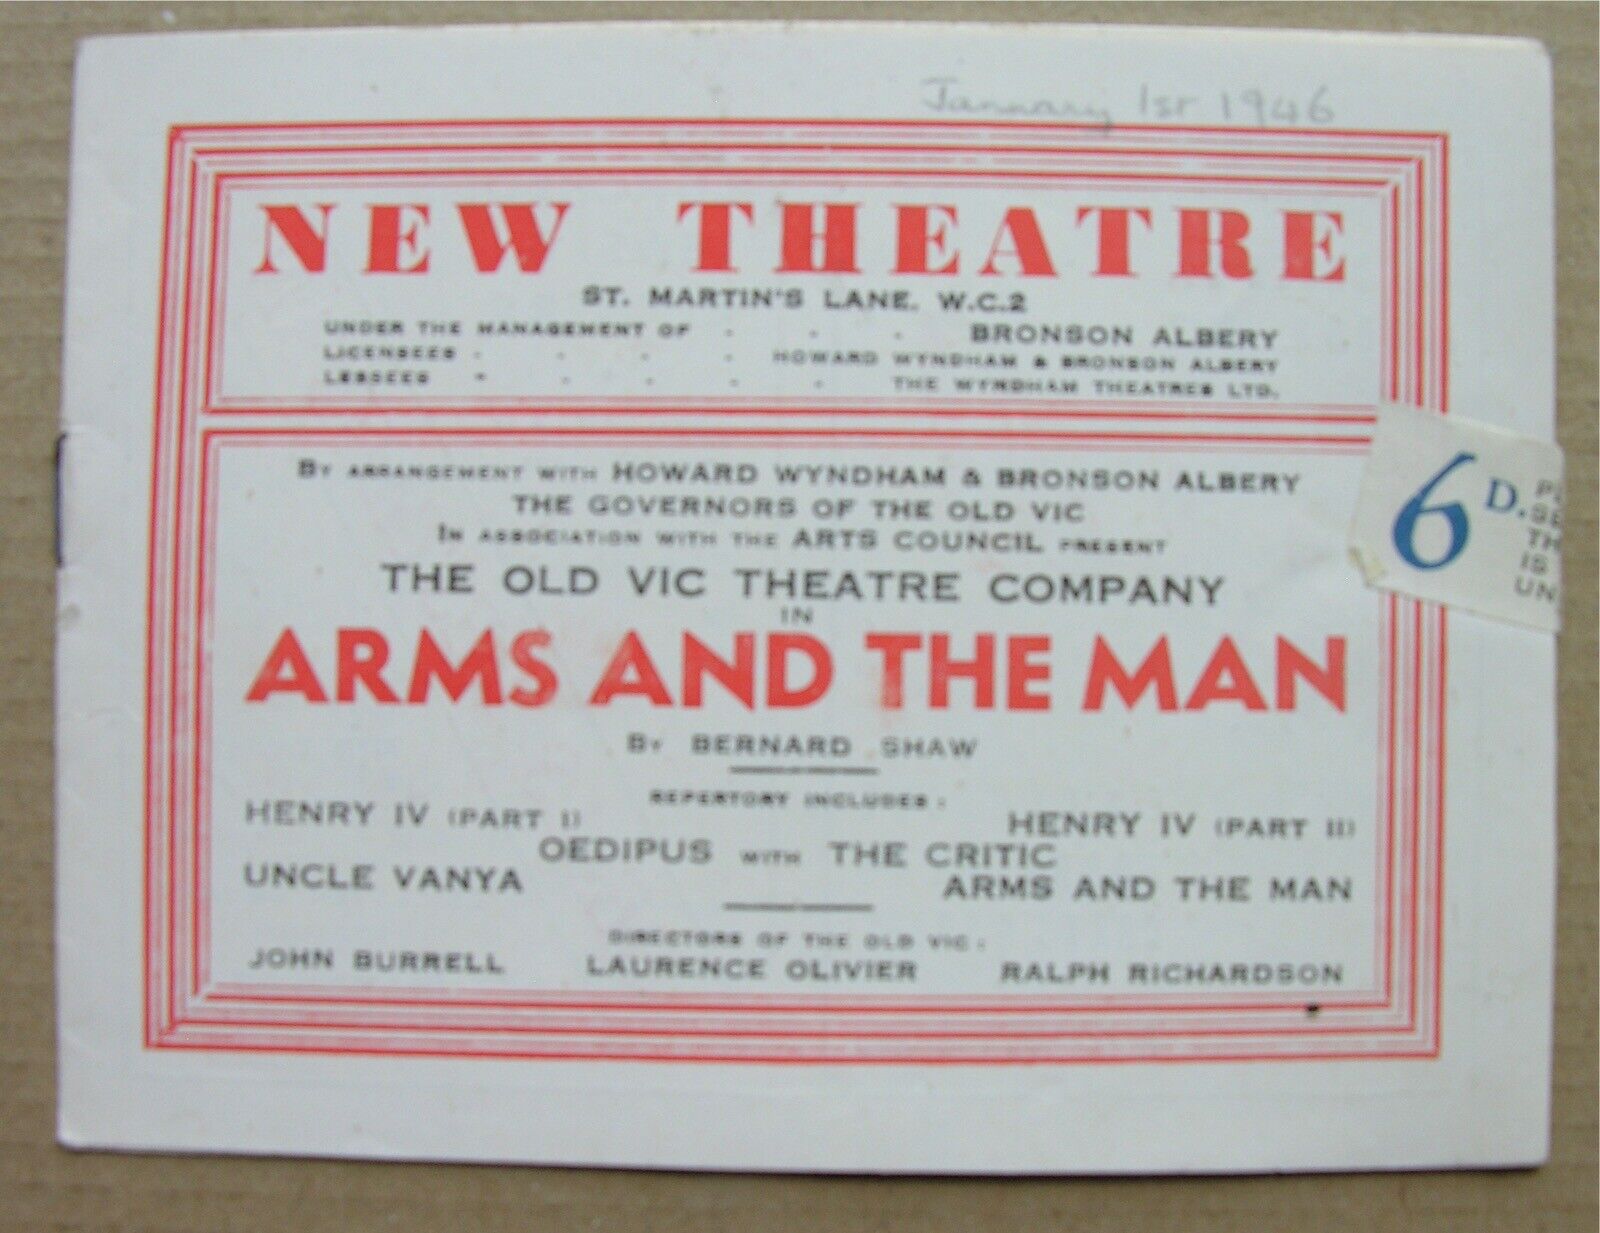 1946 ARMS AND THE MAN Shaw Laurence Olivier Margaret Leighton Ralph Richardson